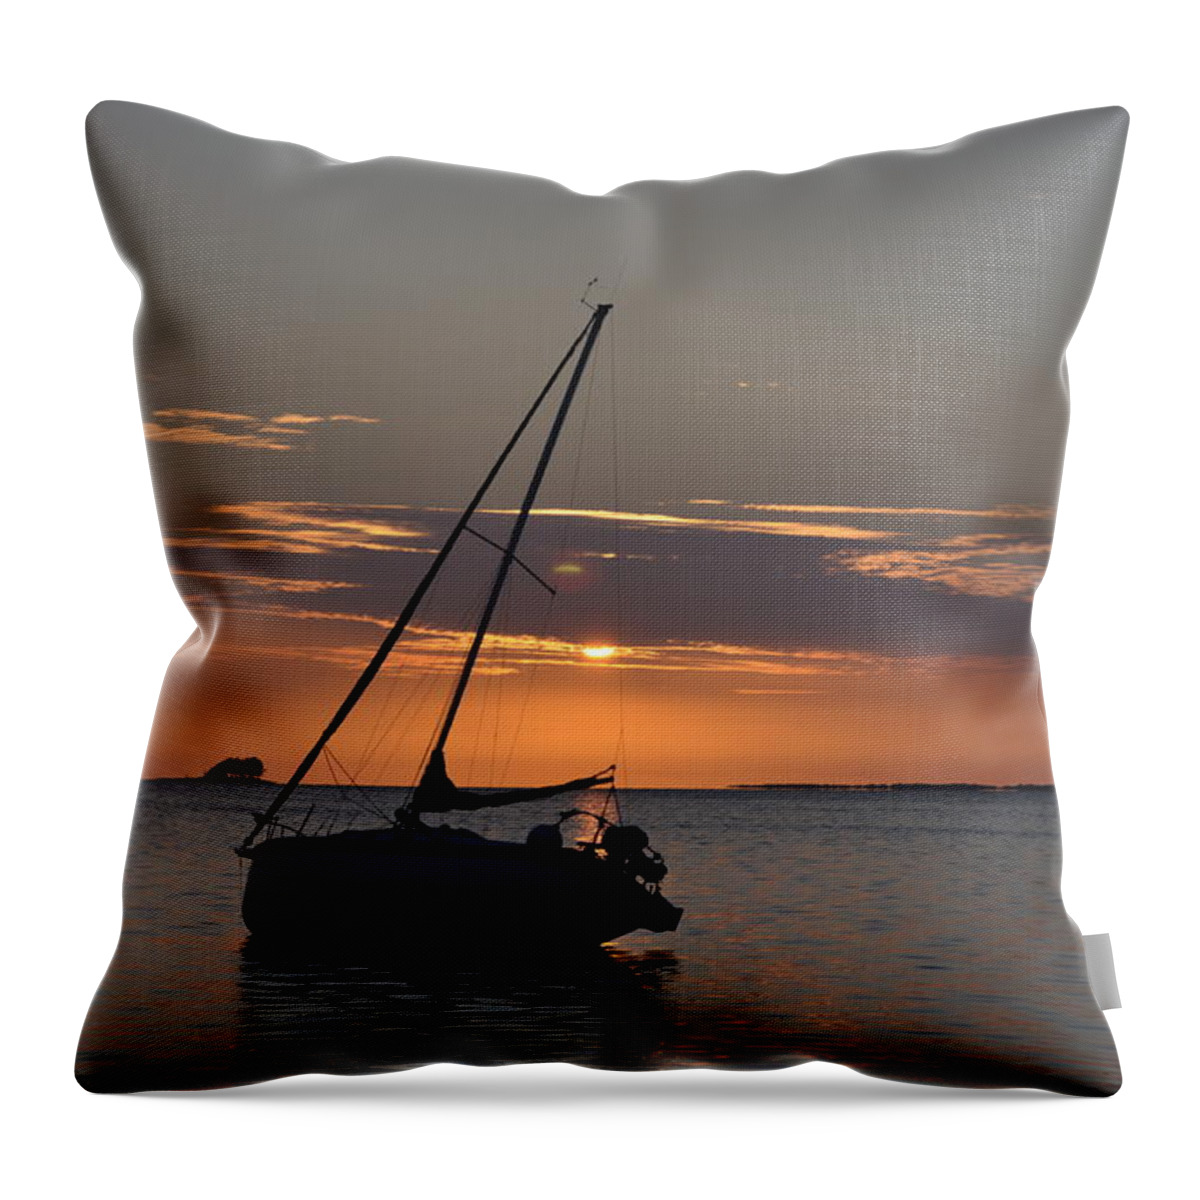 Sailor's Sunset Throw Pillow featuring the photograph Sailor's Sunset by Bill Cannon